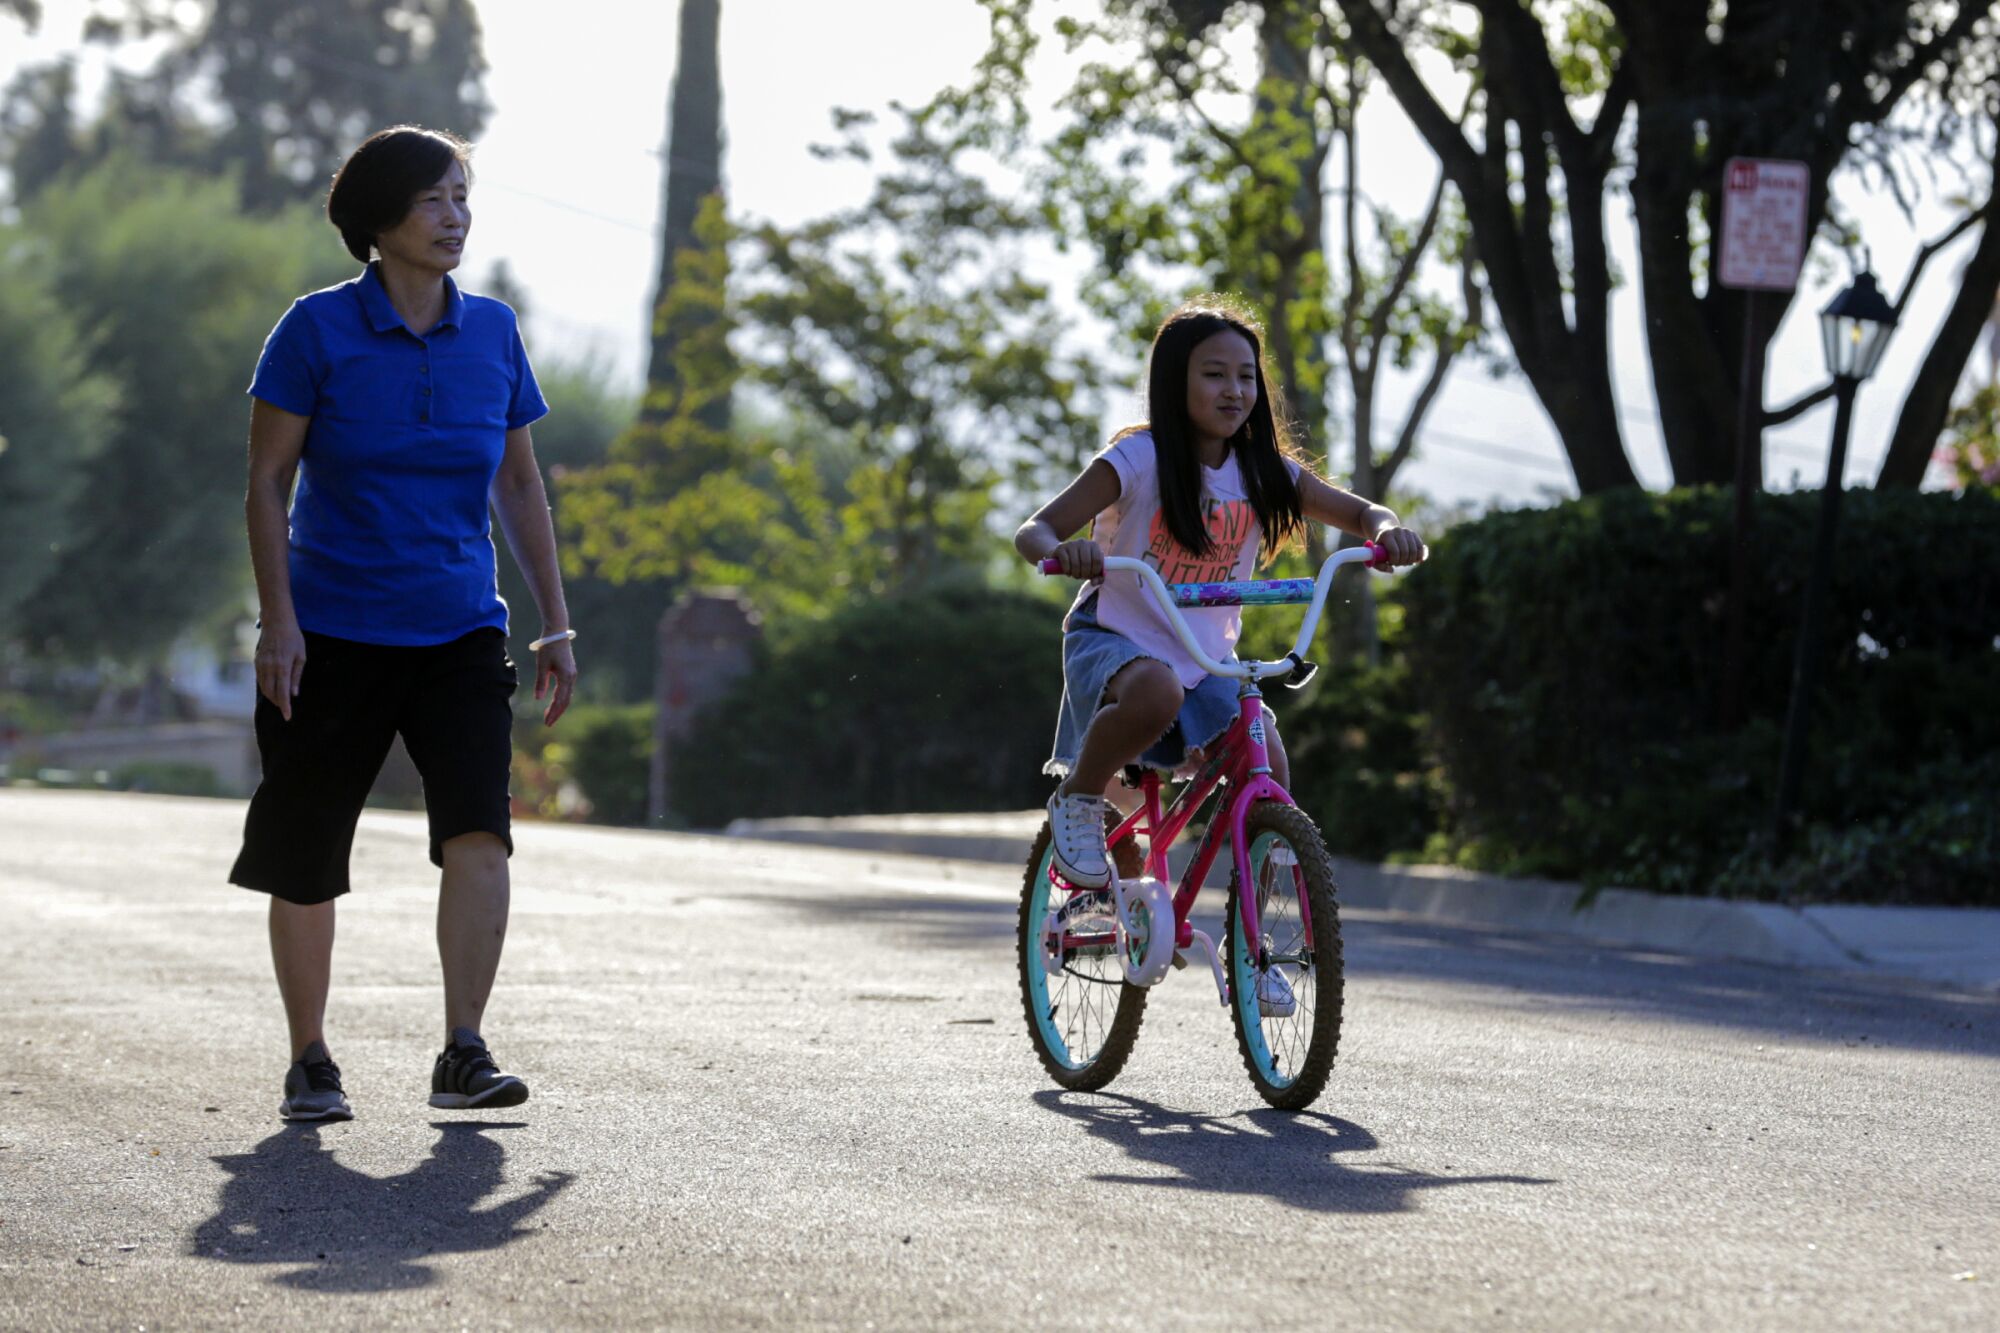 Yuyuan Lin walks with her 9-year-old granddaughter, Hannah, who rides a bicycle.